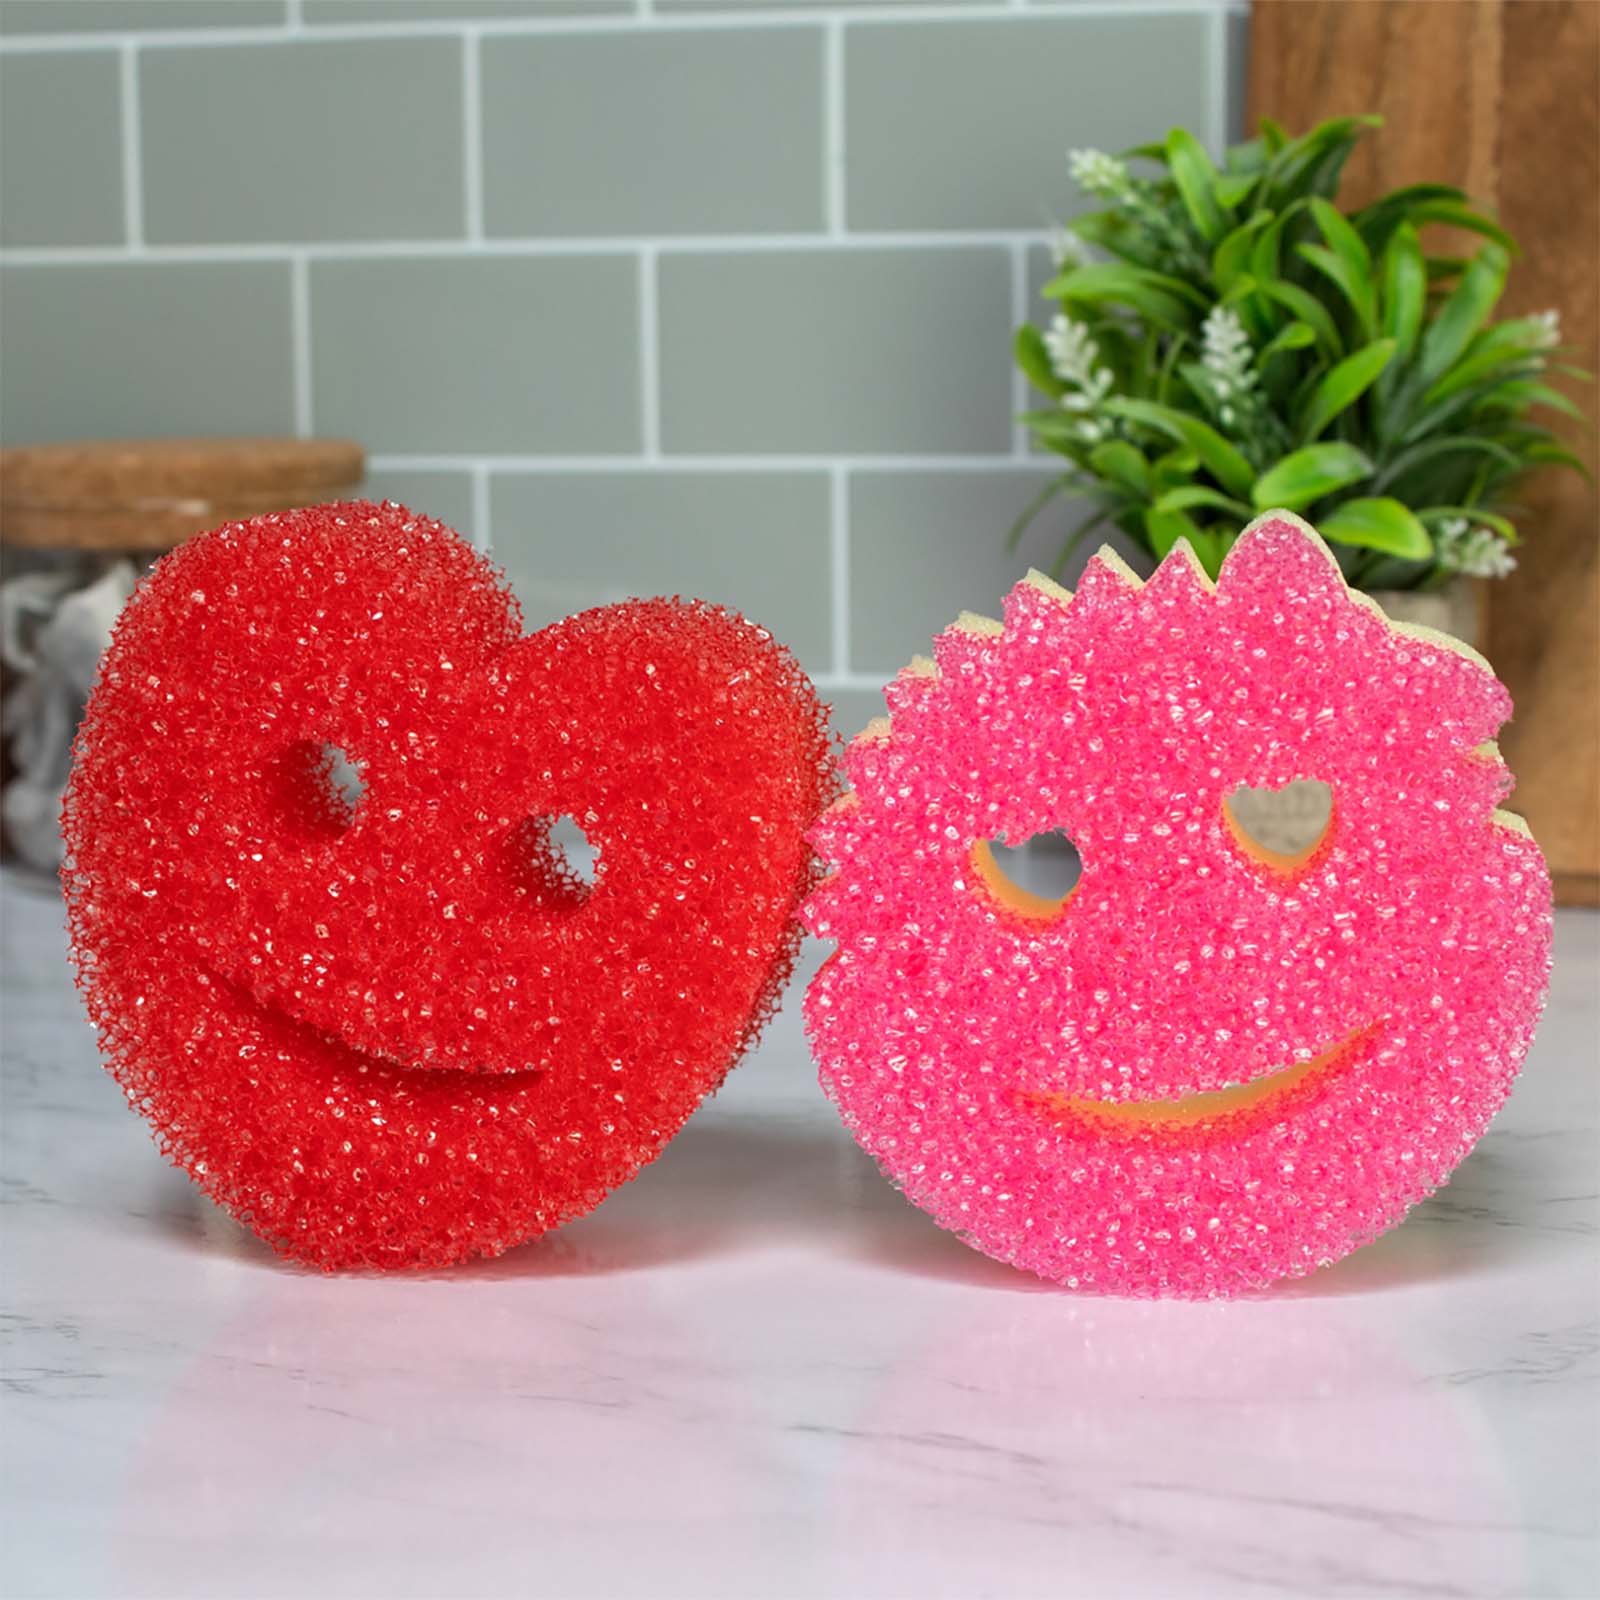 https://lyko.com/globalassets/product-images/scrub-daddy-heart-shape-3375-104-0004_2.jpg?ref=88EB428A0A